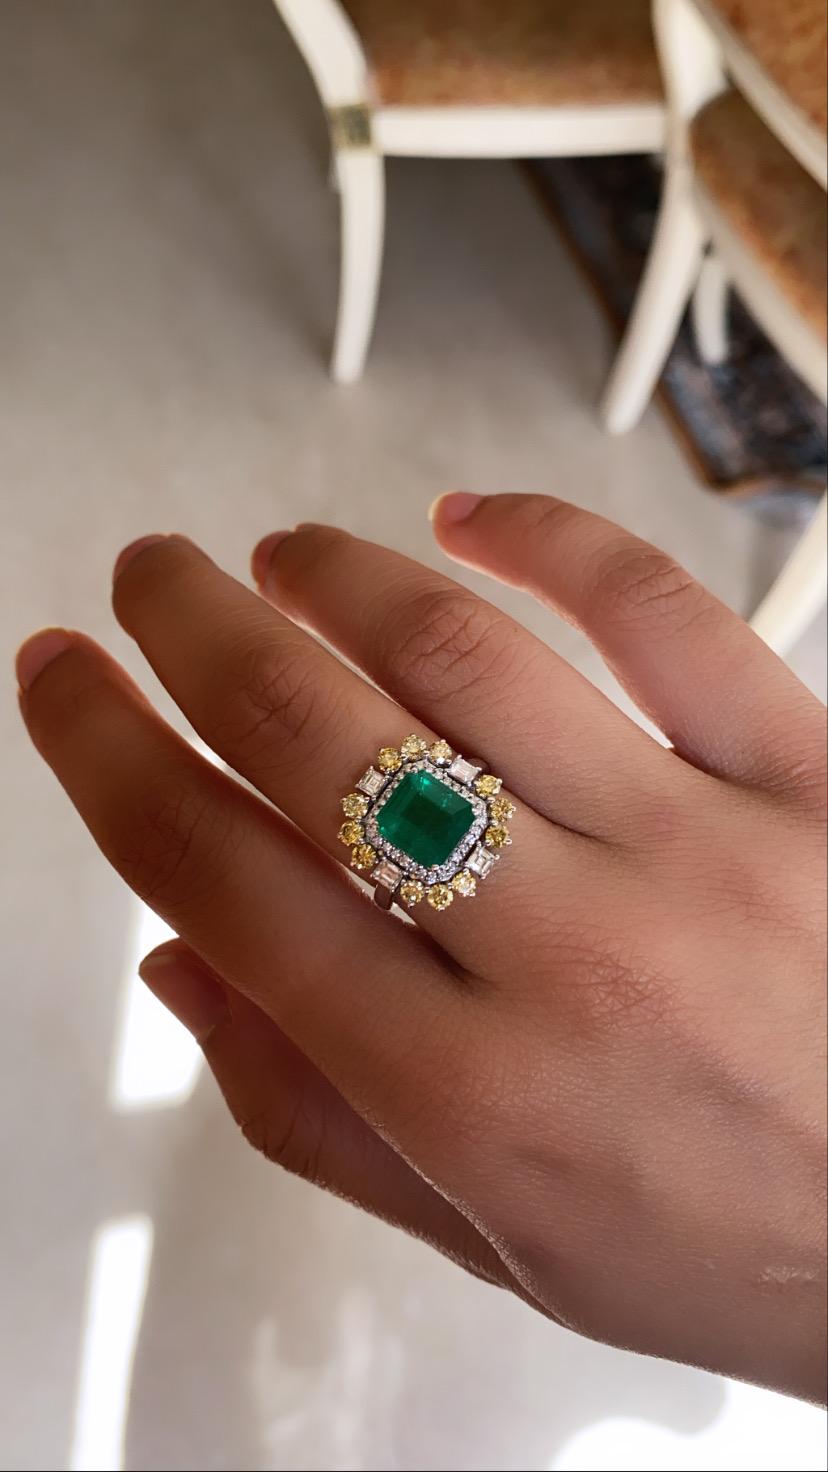 A very beautiful and wearable Emerald & Yellow Diamonds Cocktail Ring set in 18K White Gold. The Emerald weighs 2.79 carats and is of Zambian origin. The Emerald is completely natural, without any treatment & is octagonal in shape. The combined